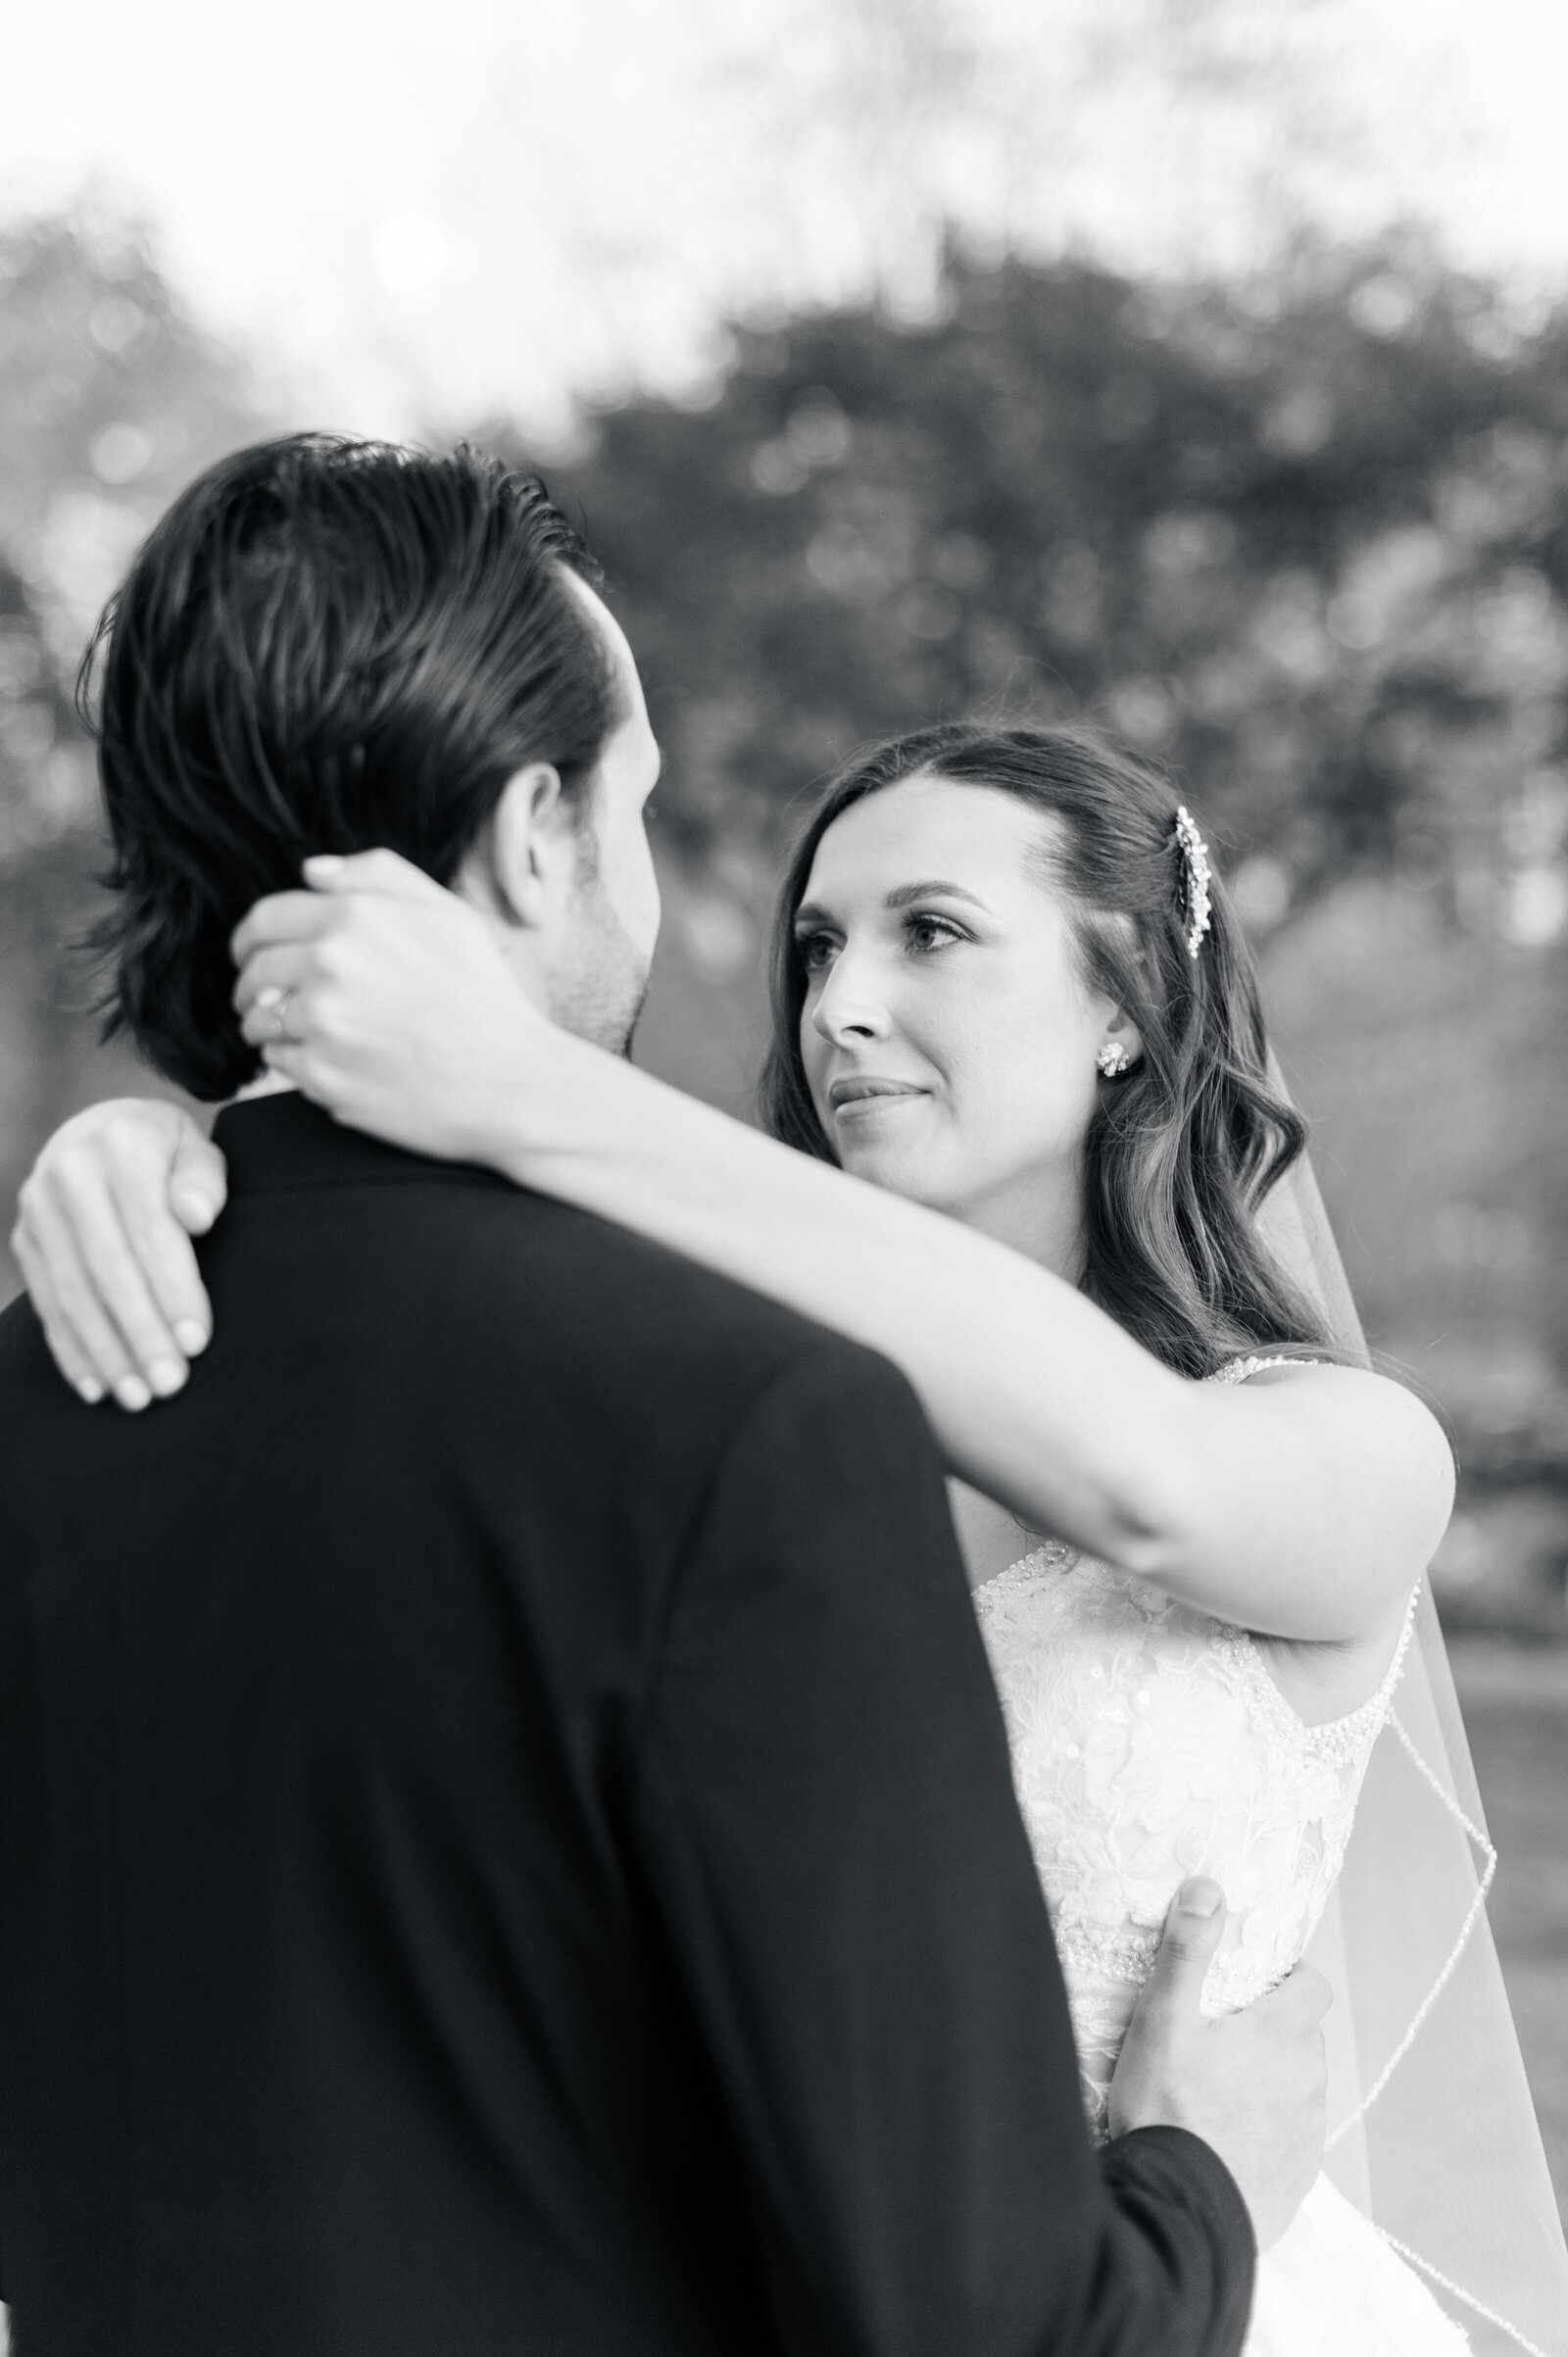 Boise wedding photography at Stone Crossing couples portraits in black and white